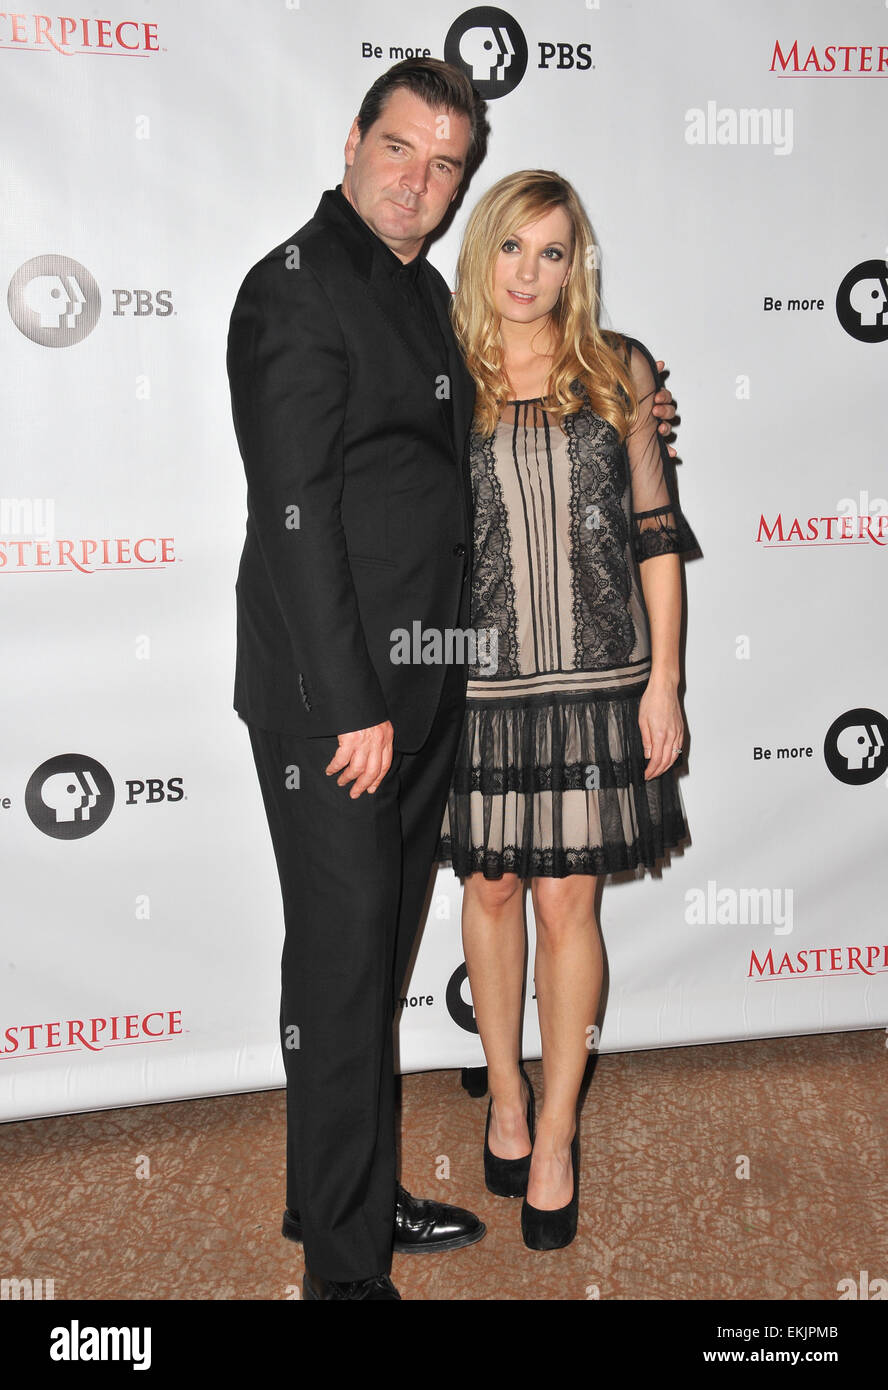 LOS ANGELES, CA - JULY 22, 2012: Brendan Coyle & Joanne Froggatt at photocall for the third series of Downton Abbey at the Beverly Hilton Hotel. Stock Photo